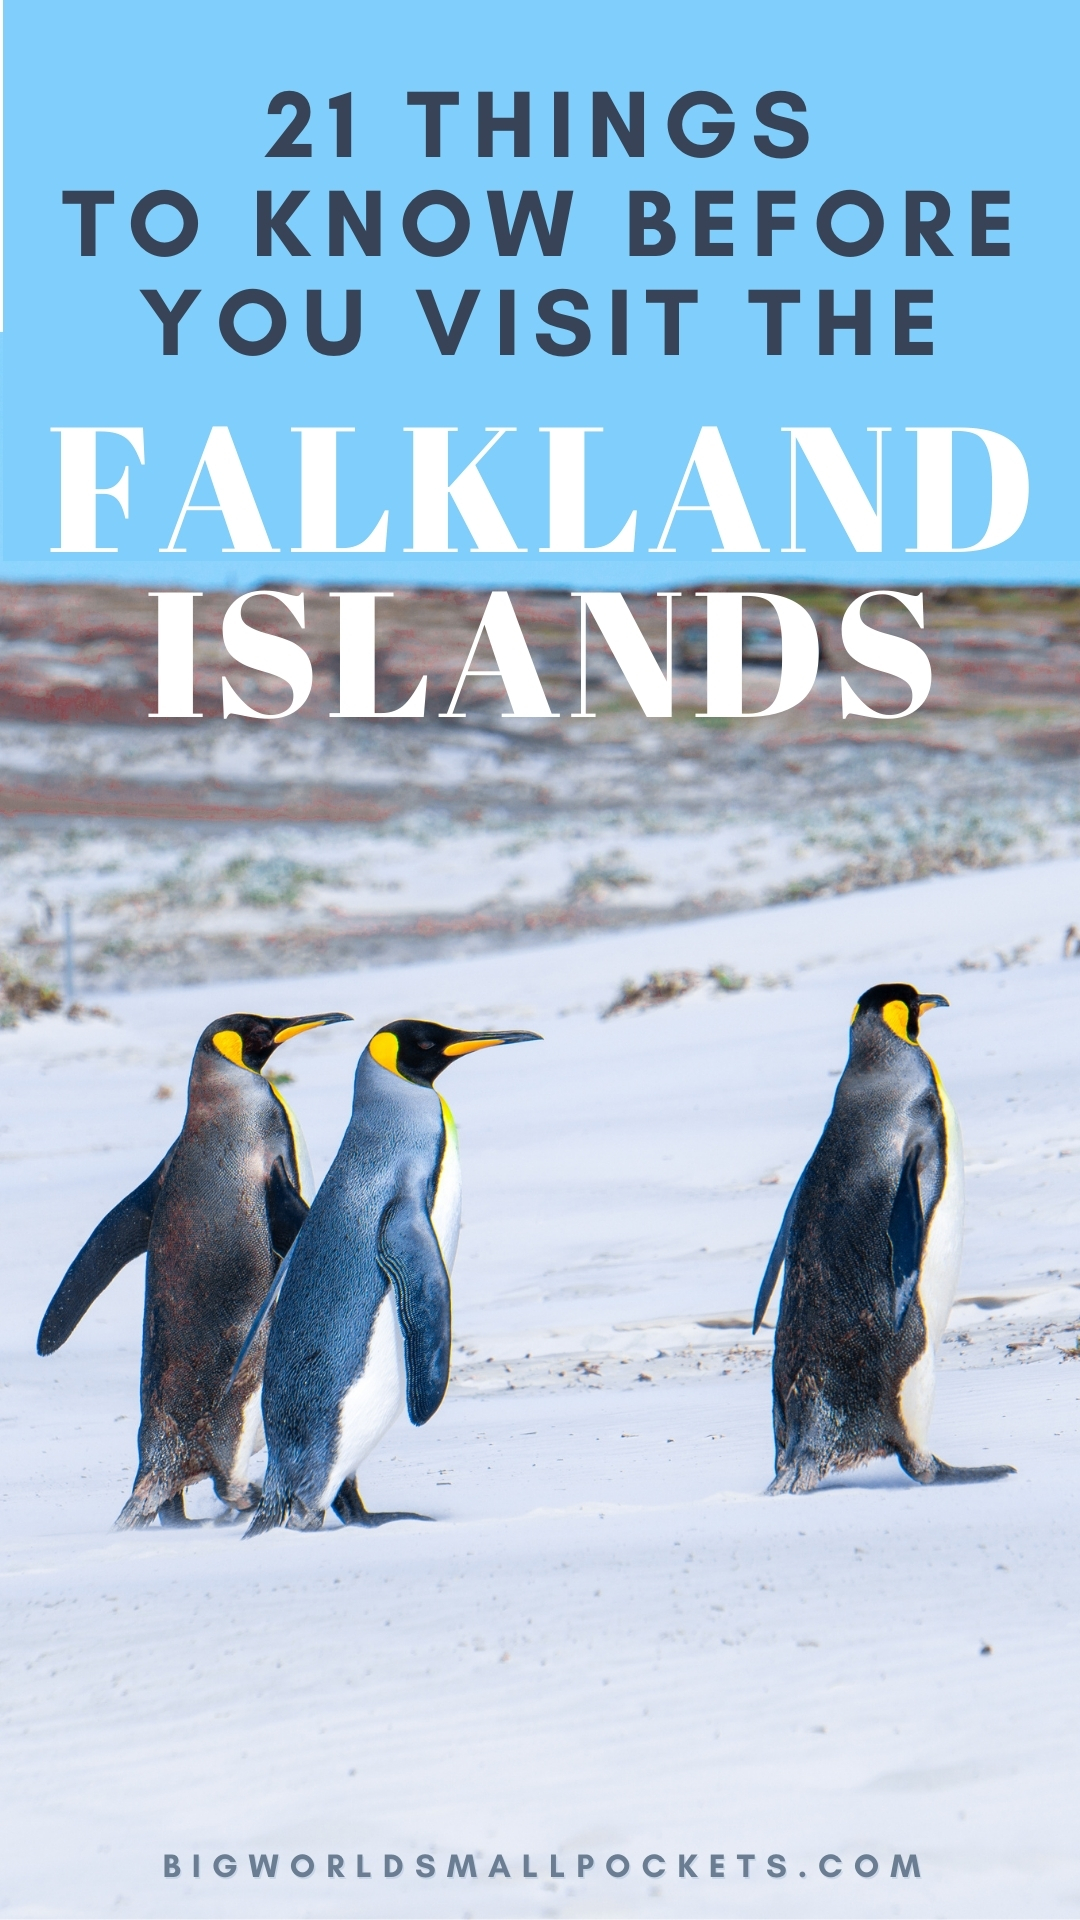 21 Things to Know Before you Visit the Falkland Islands